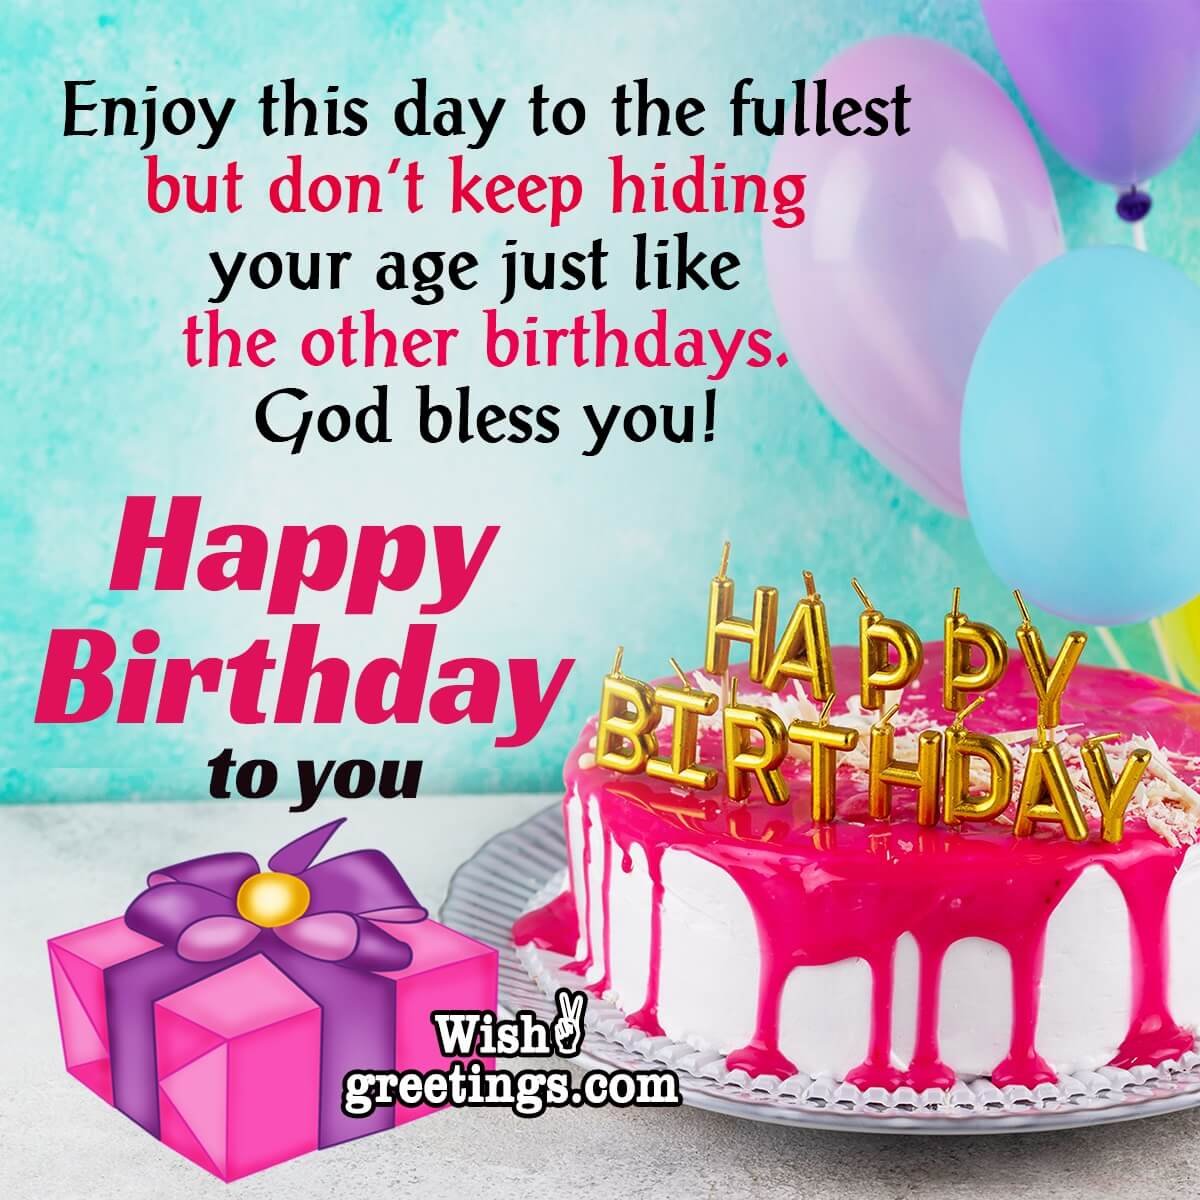 305 Heart Touching Best Birthday Wishes, Messages, Quotes, 50% OFF